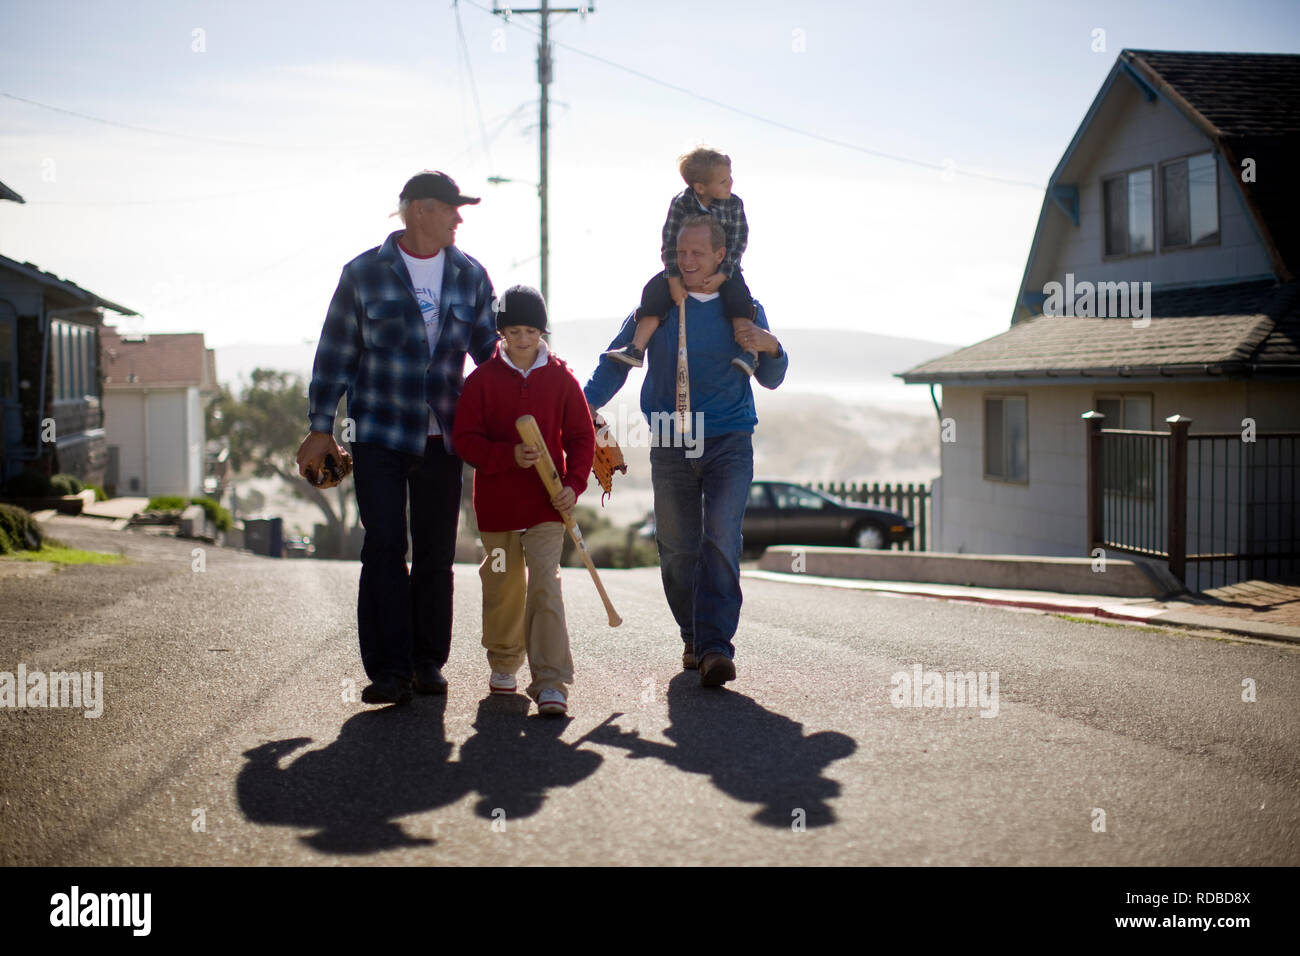 Two young boys walking with their fathers and holding softball gear Stock Photo